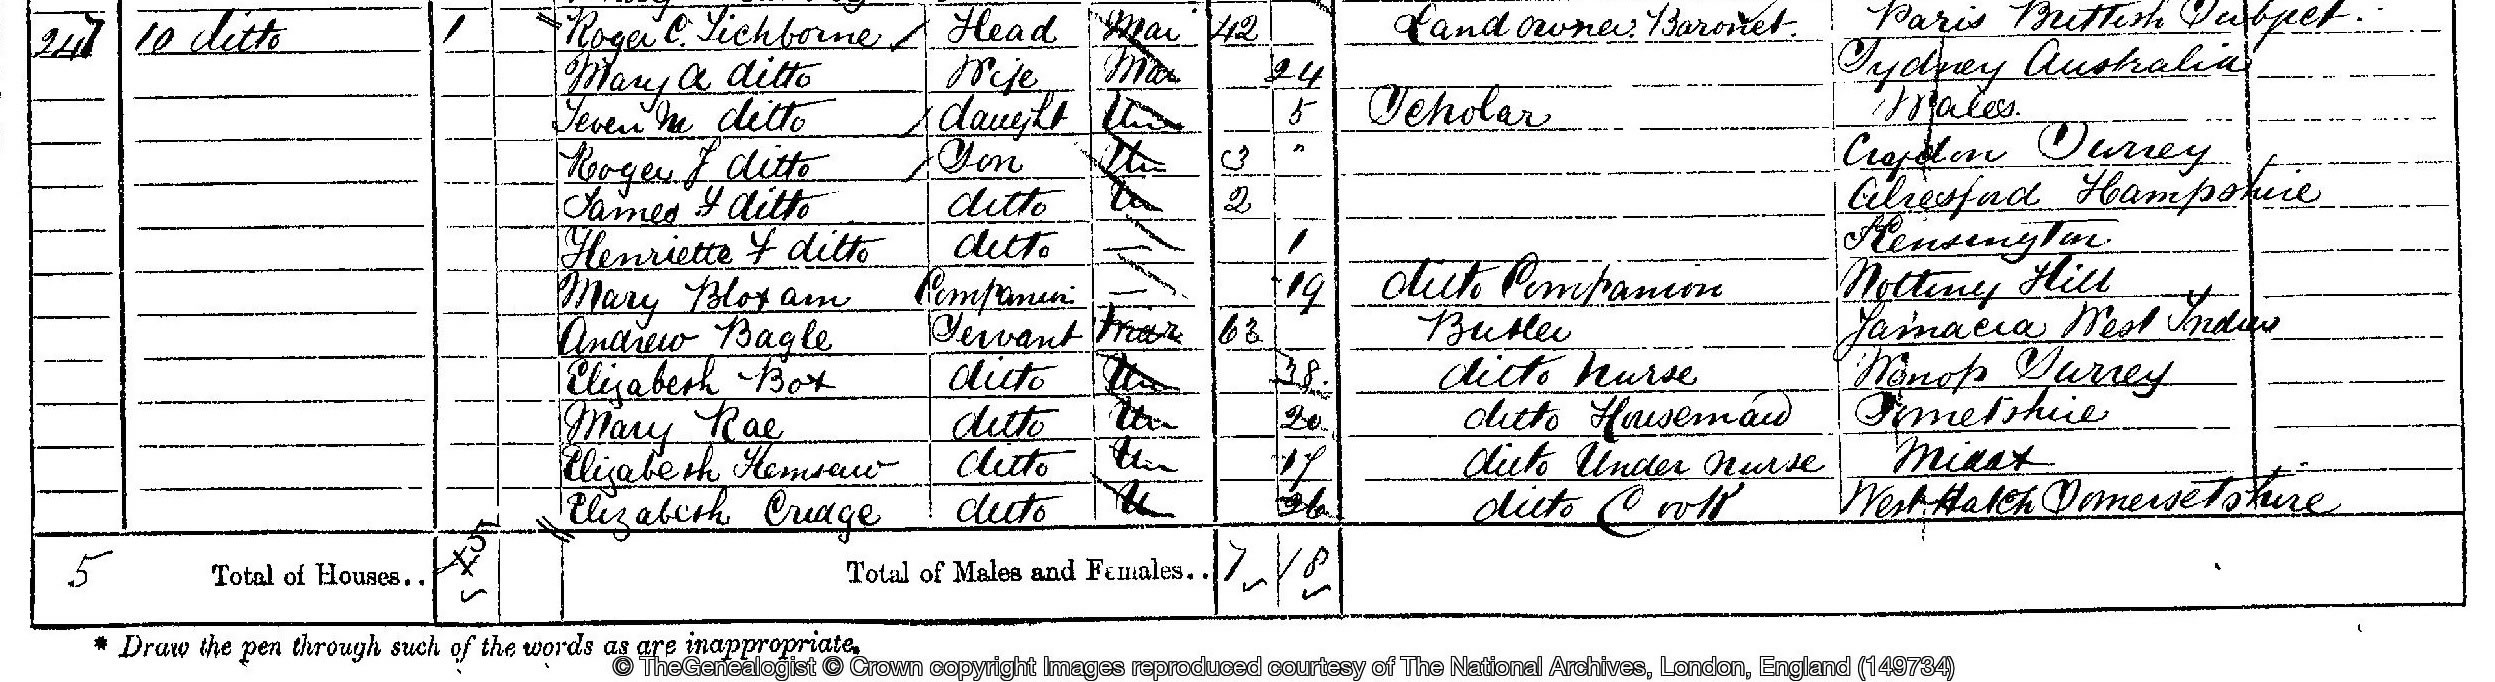 1871 census reveals the man claiming to be Sir Roger Tichborne at 10 Harley Road, Kensington